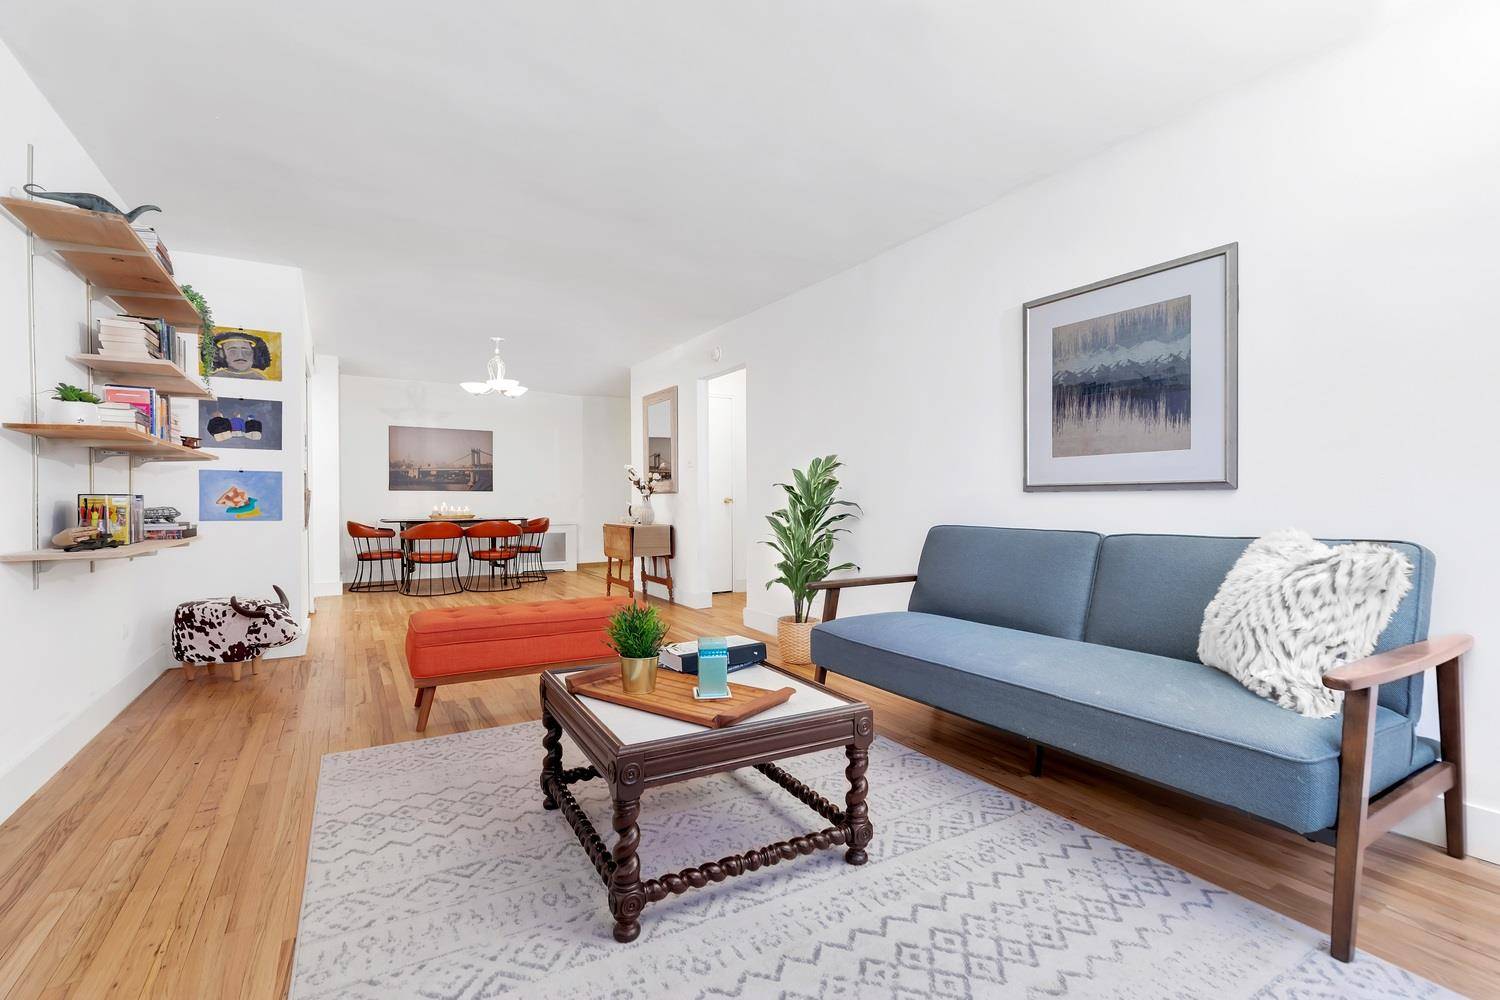 Welcome to 2S, a spacious one bedroom Co op in prime Ditmas Park, Brooklyn.